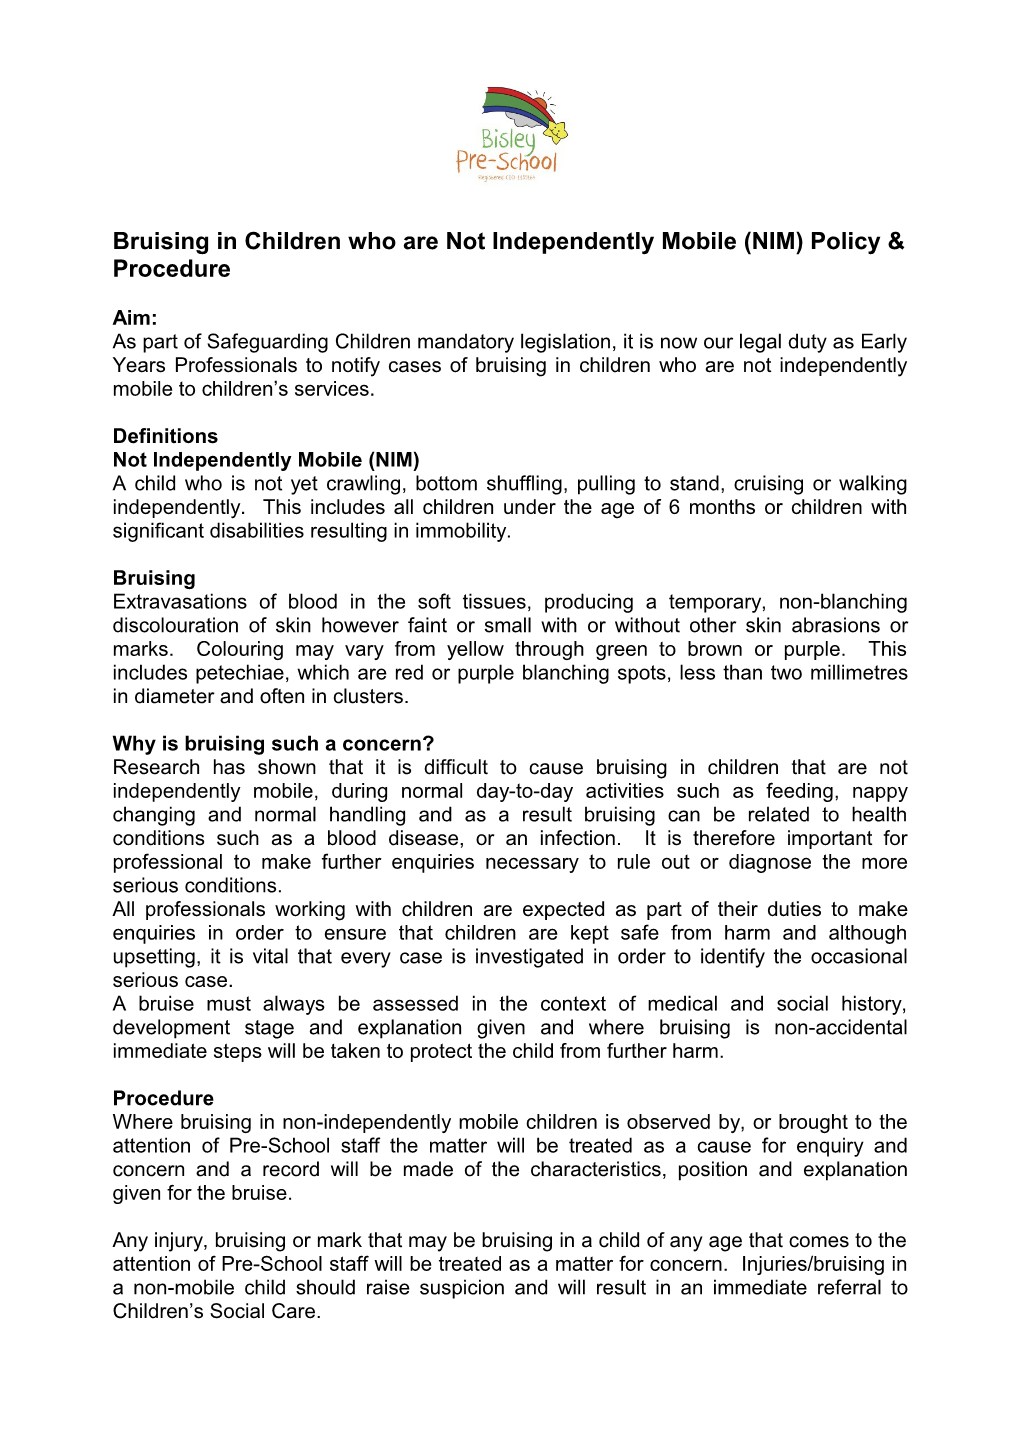 Bruising in Children Who Are Not Independently Mobile (NIM) Policy & Procedure